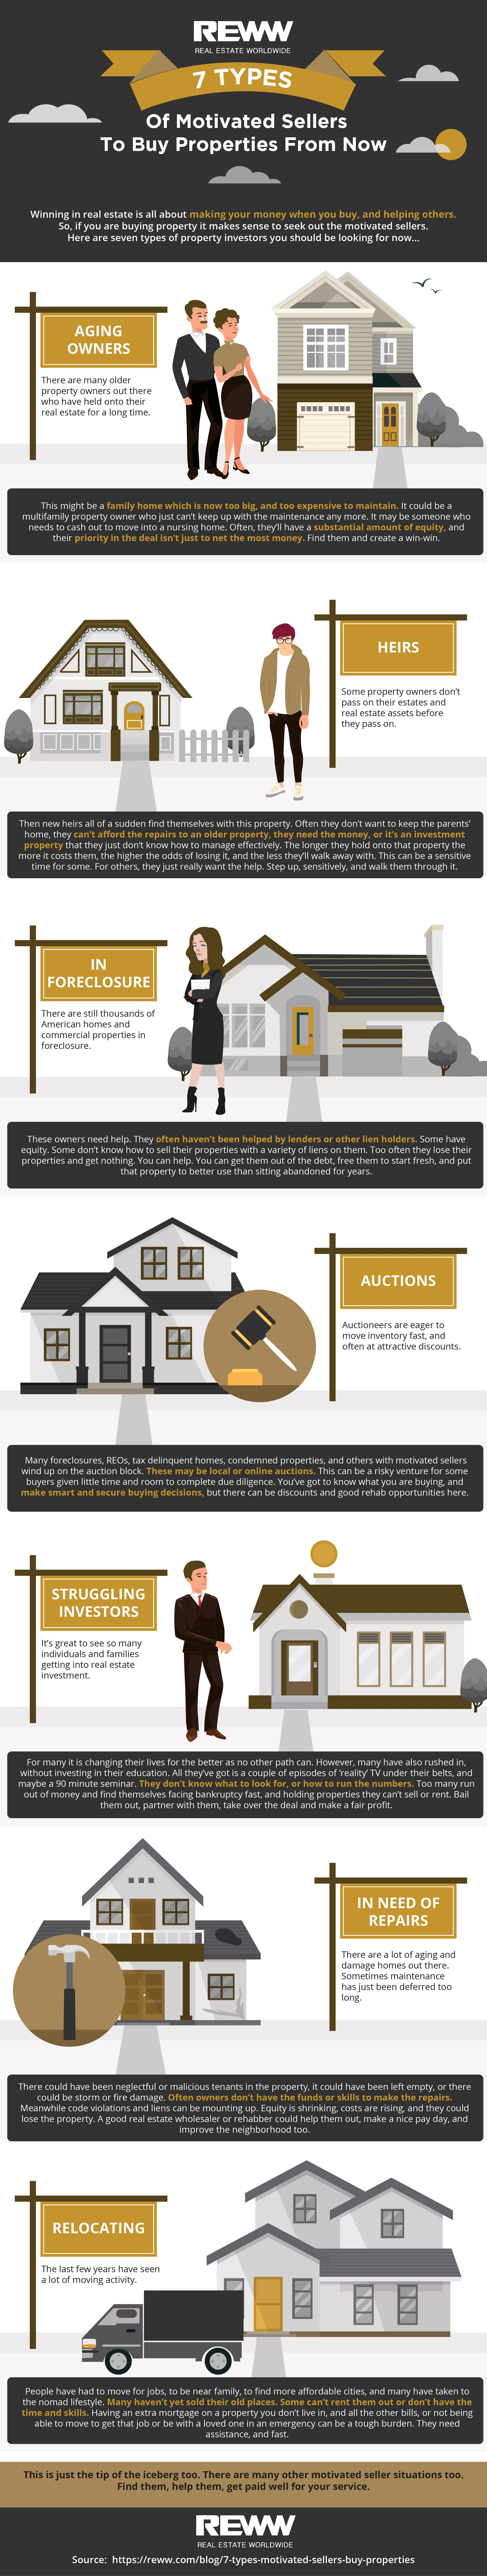 7 Types Of Motivated Sellers To Buy Properties From Now